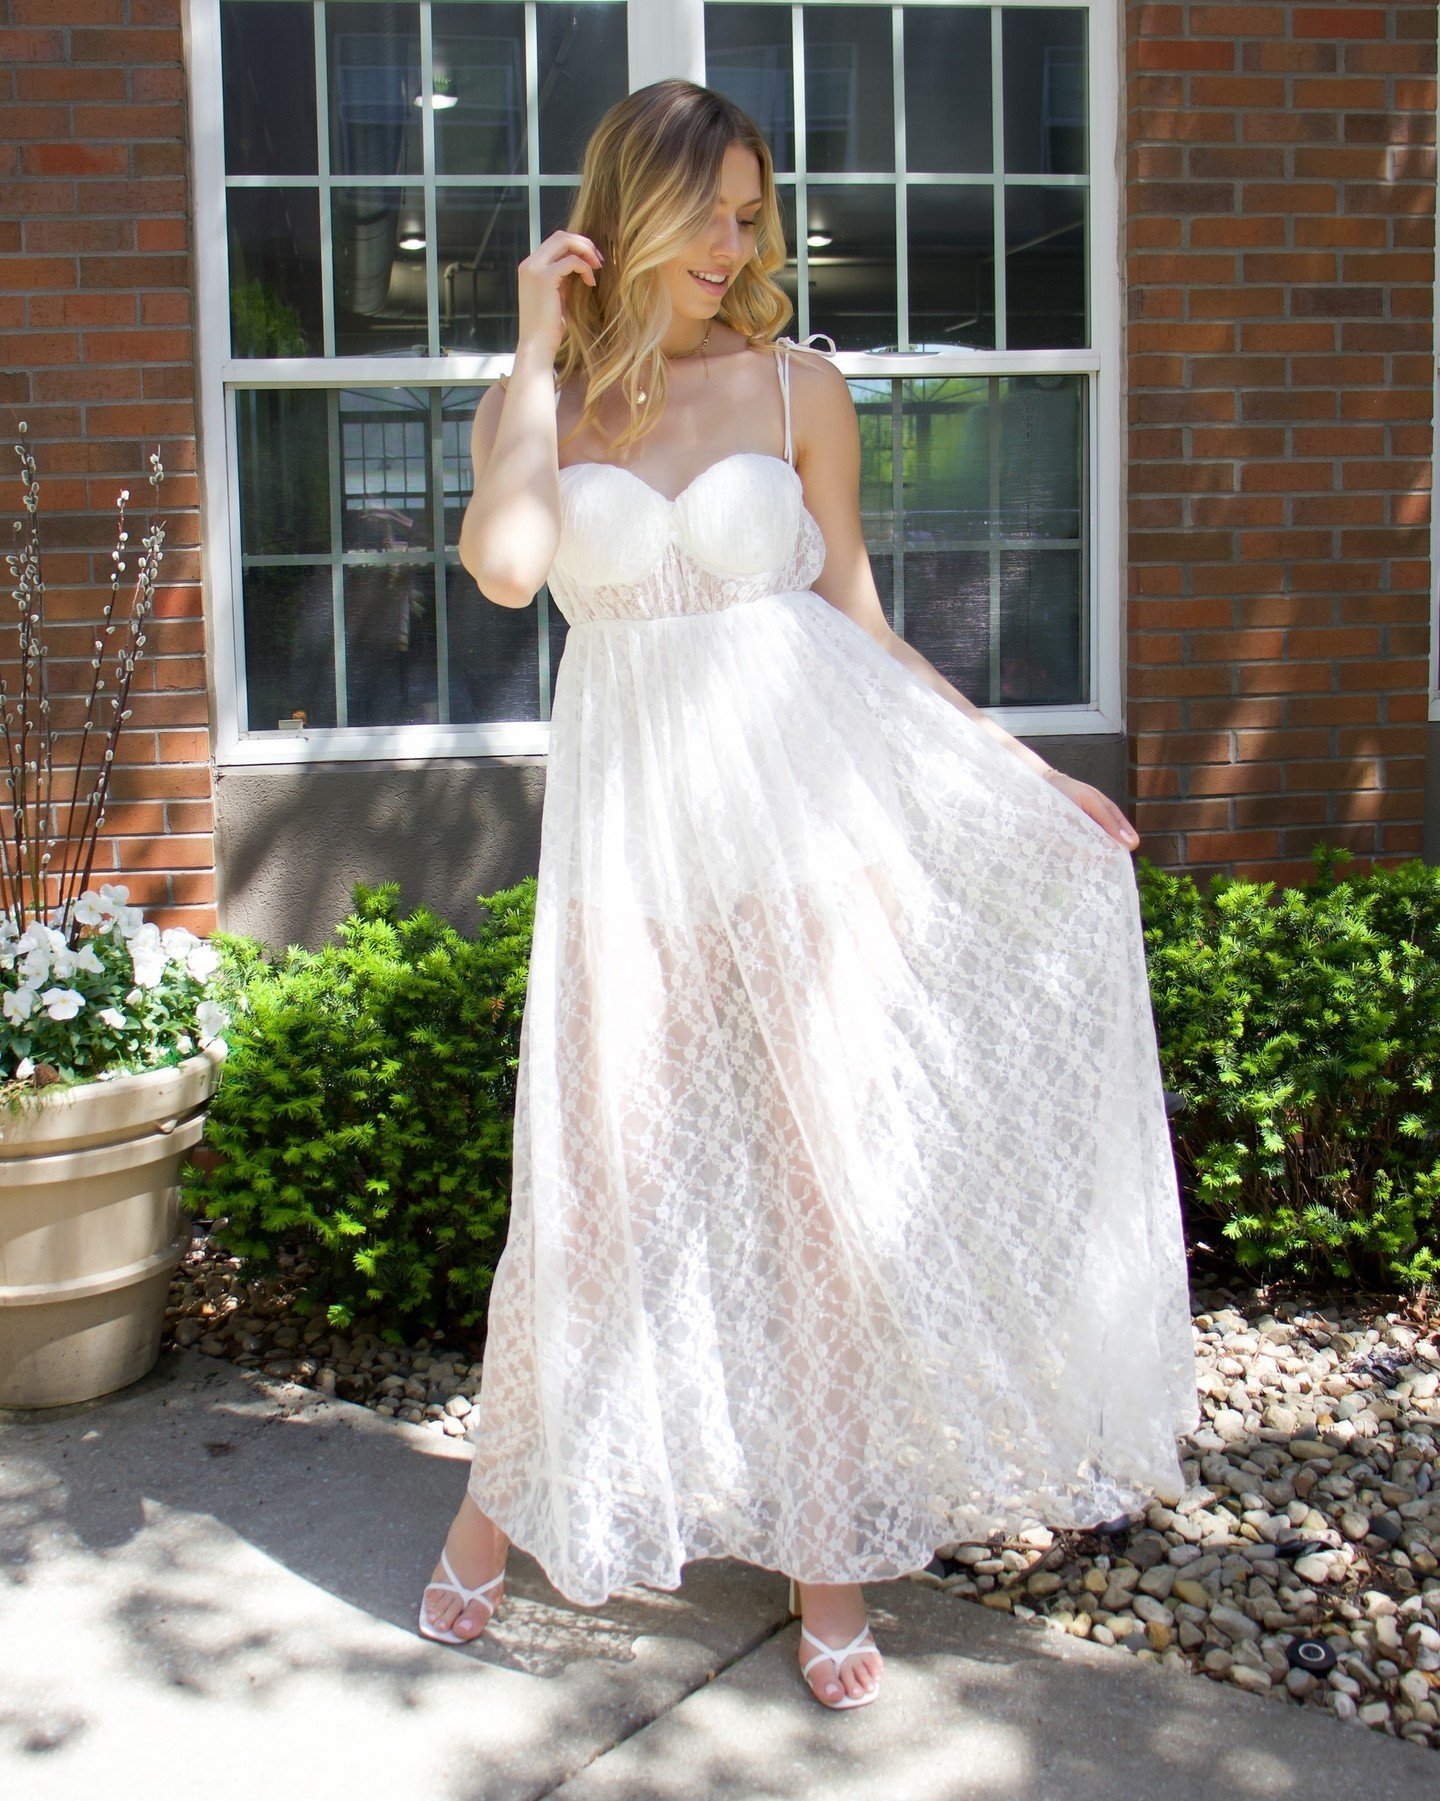 Introducing your newest obsession - our lace lined maxi dress. 🤍 The dreamiest addition to your summer wardrobe. Tap for product details below. @discoveryclothing ✨⁠
⁠
Style #ID6582 - $22.99